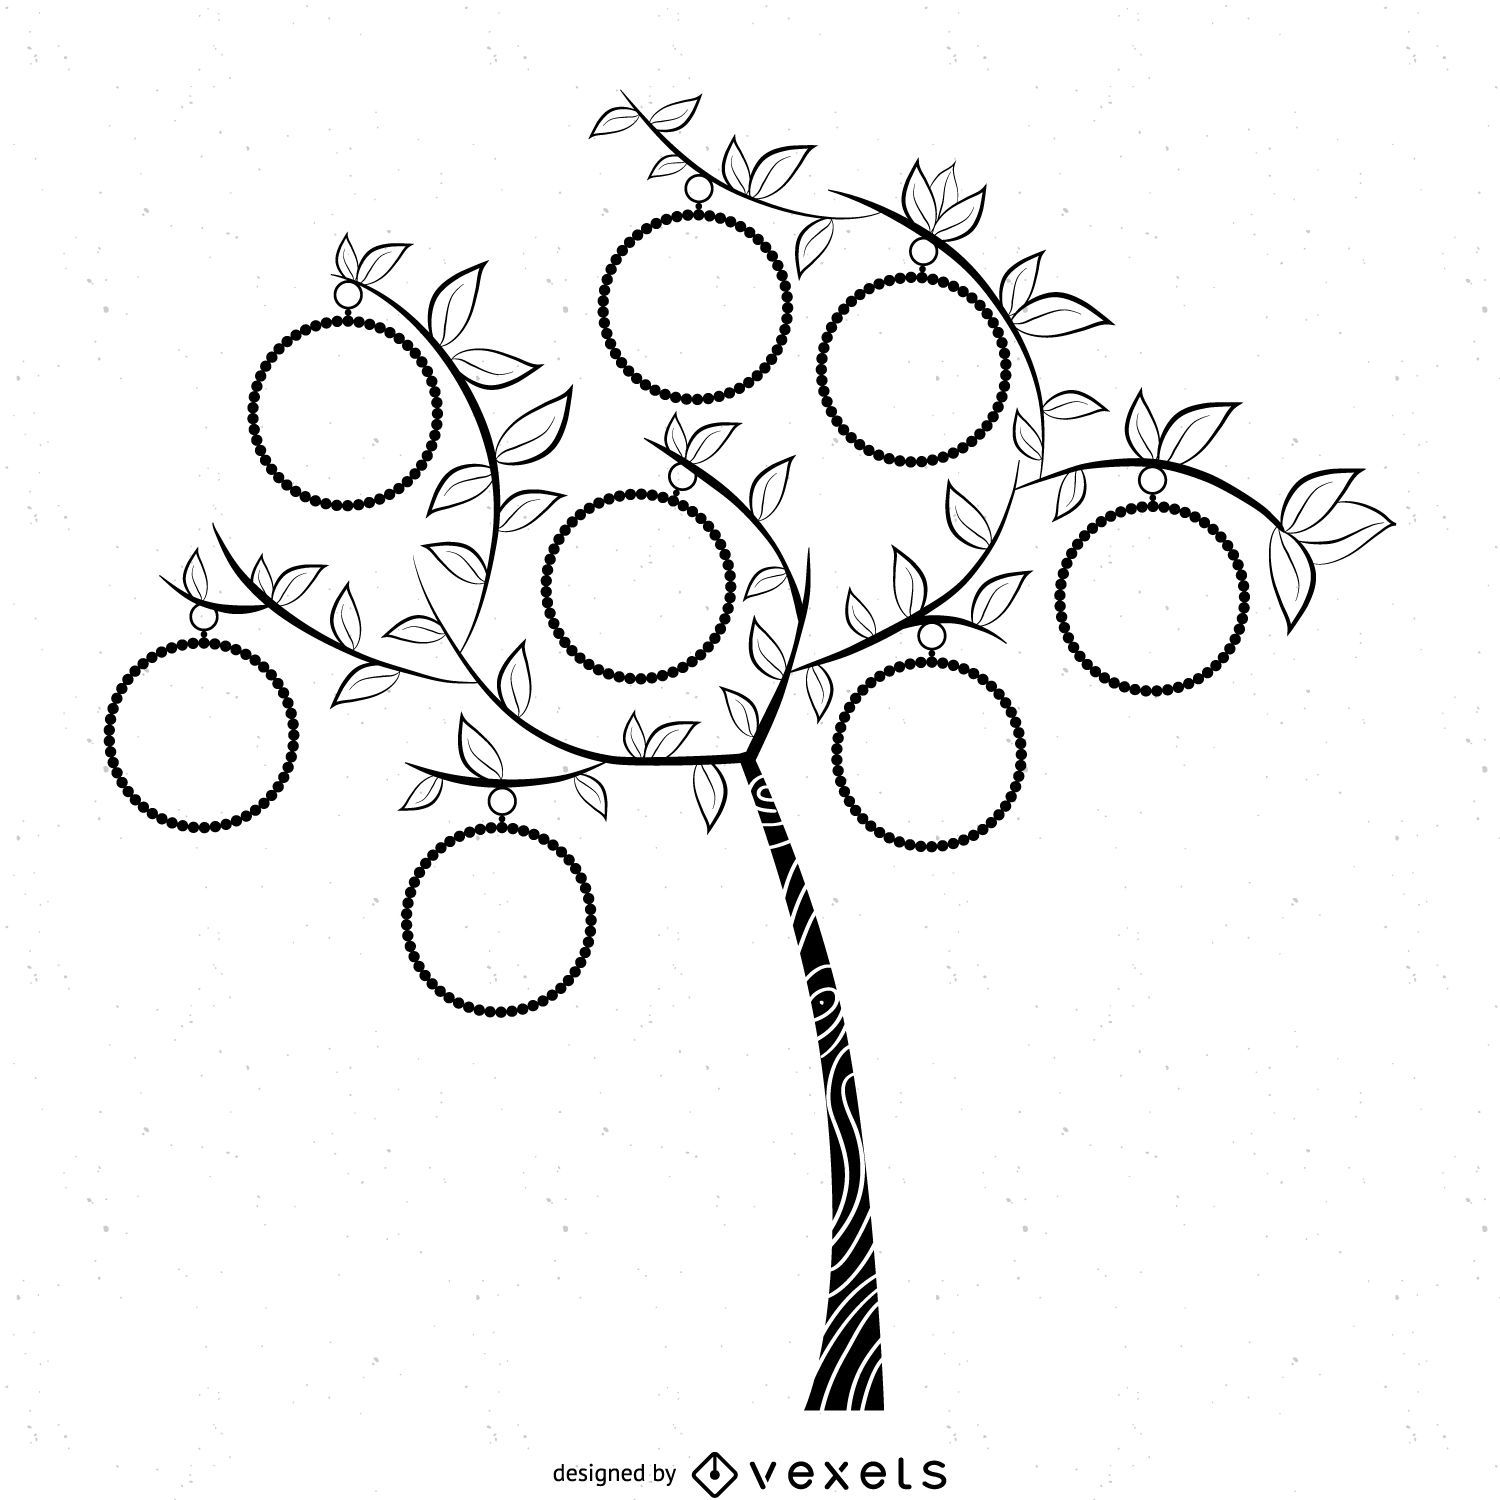 family tree drawing black and white